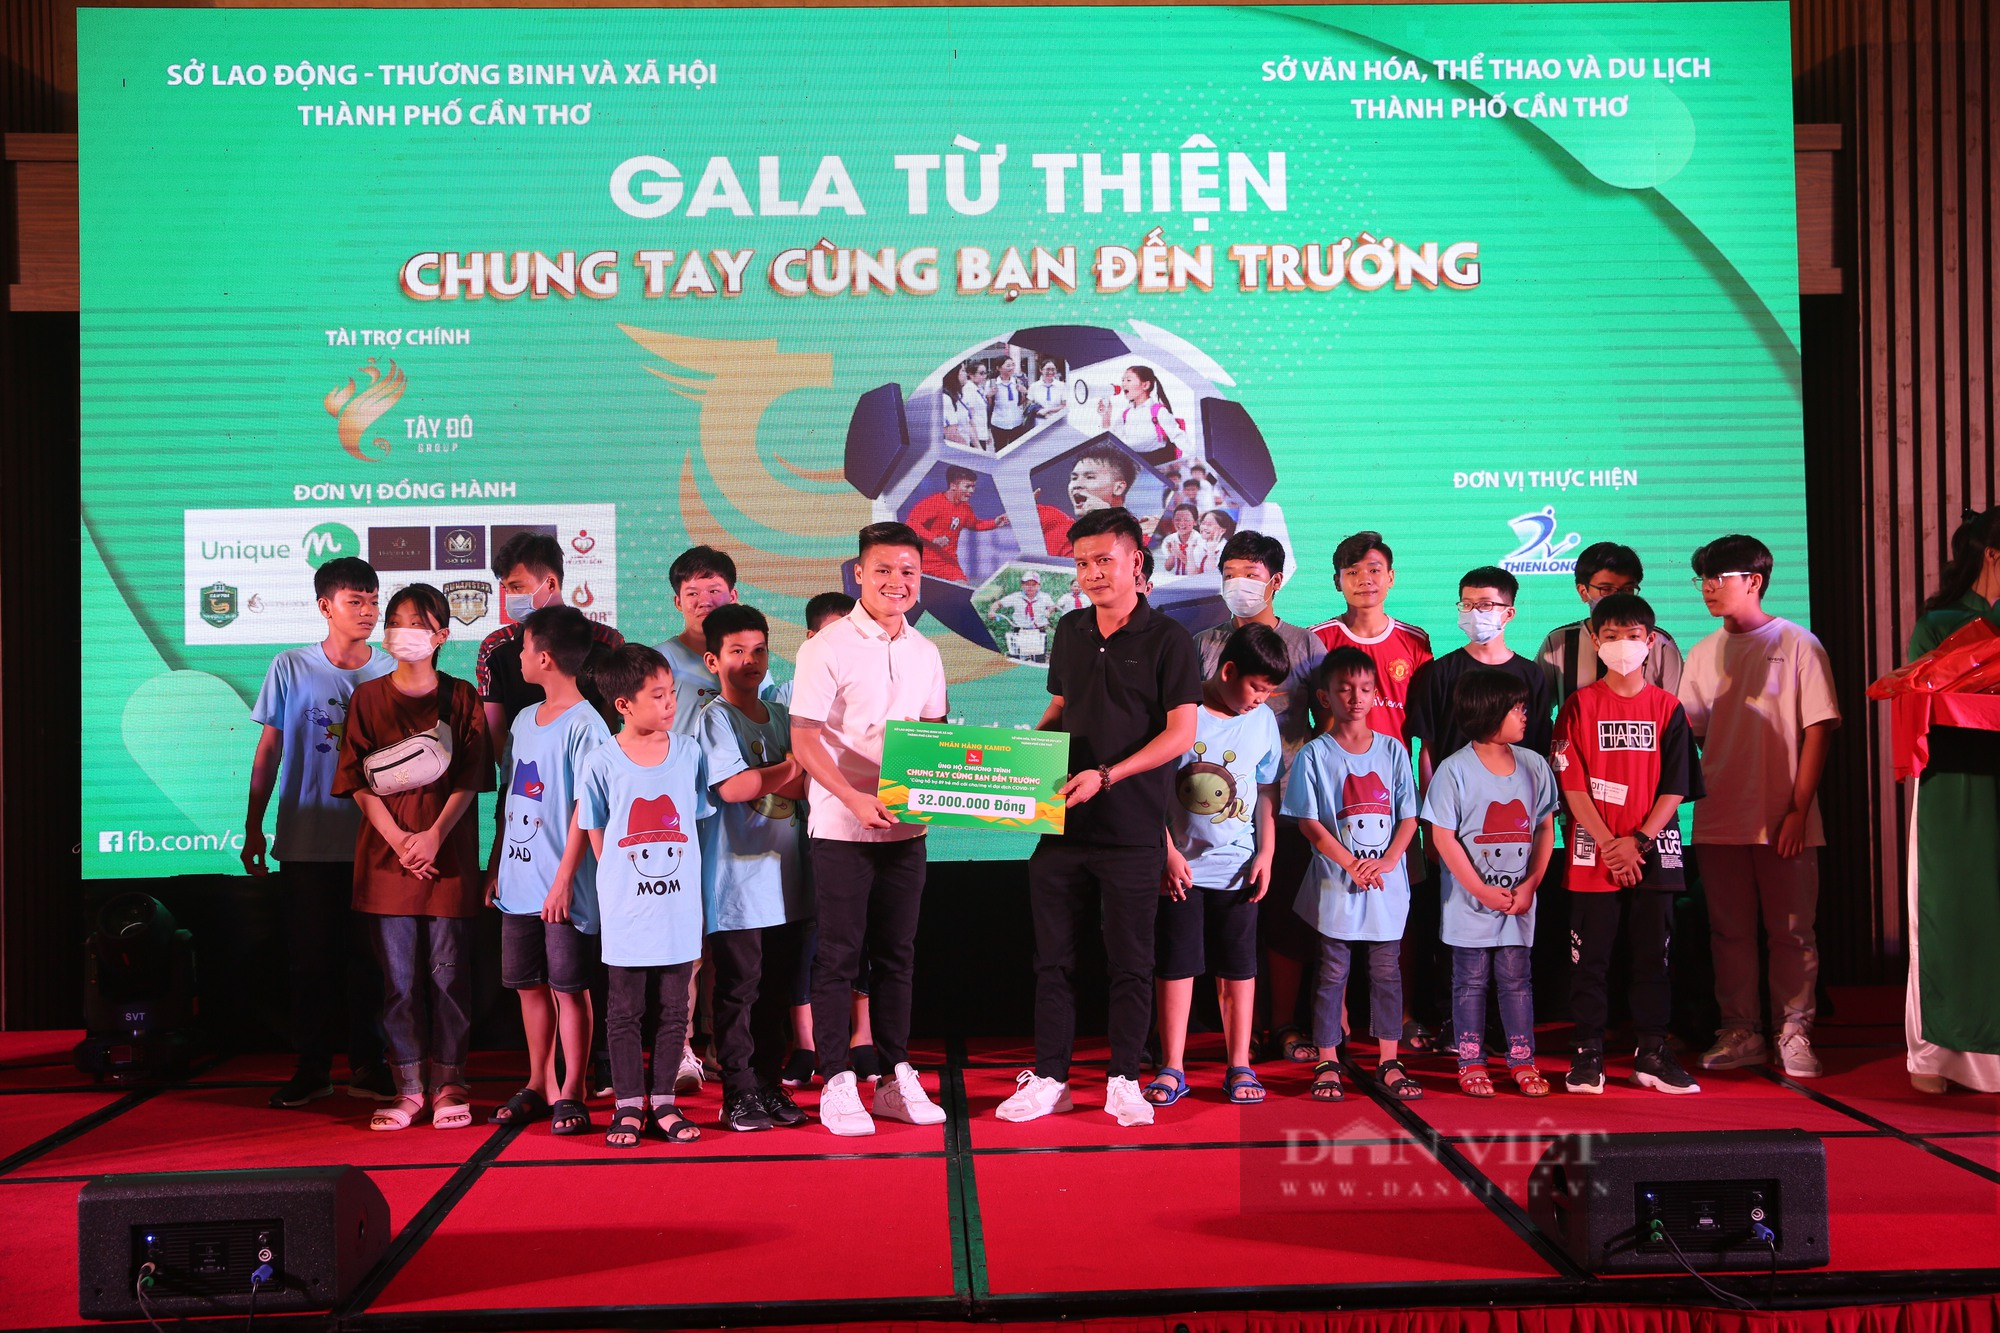 Rumored girlfriend quietly encouraged Quang Hai to wear a Can Tho shirt - Photo 10.